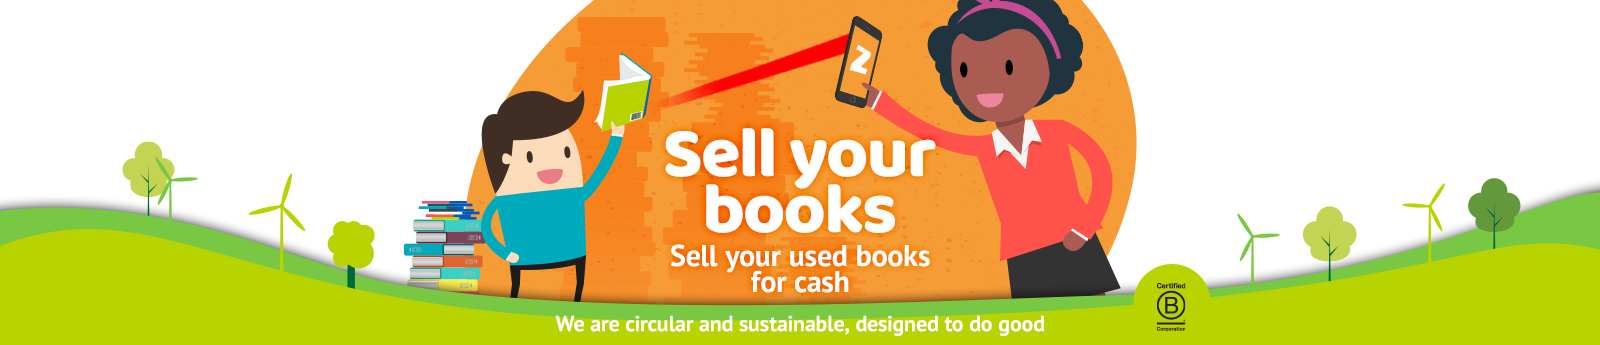 sell books for cash